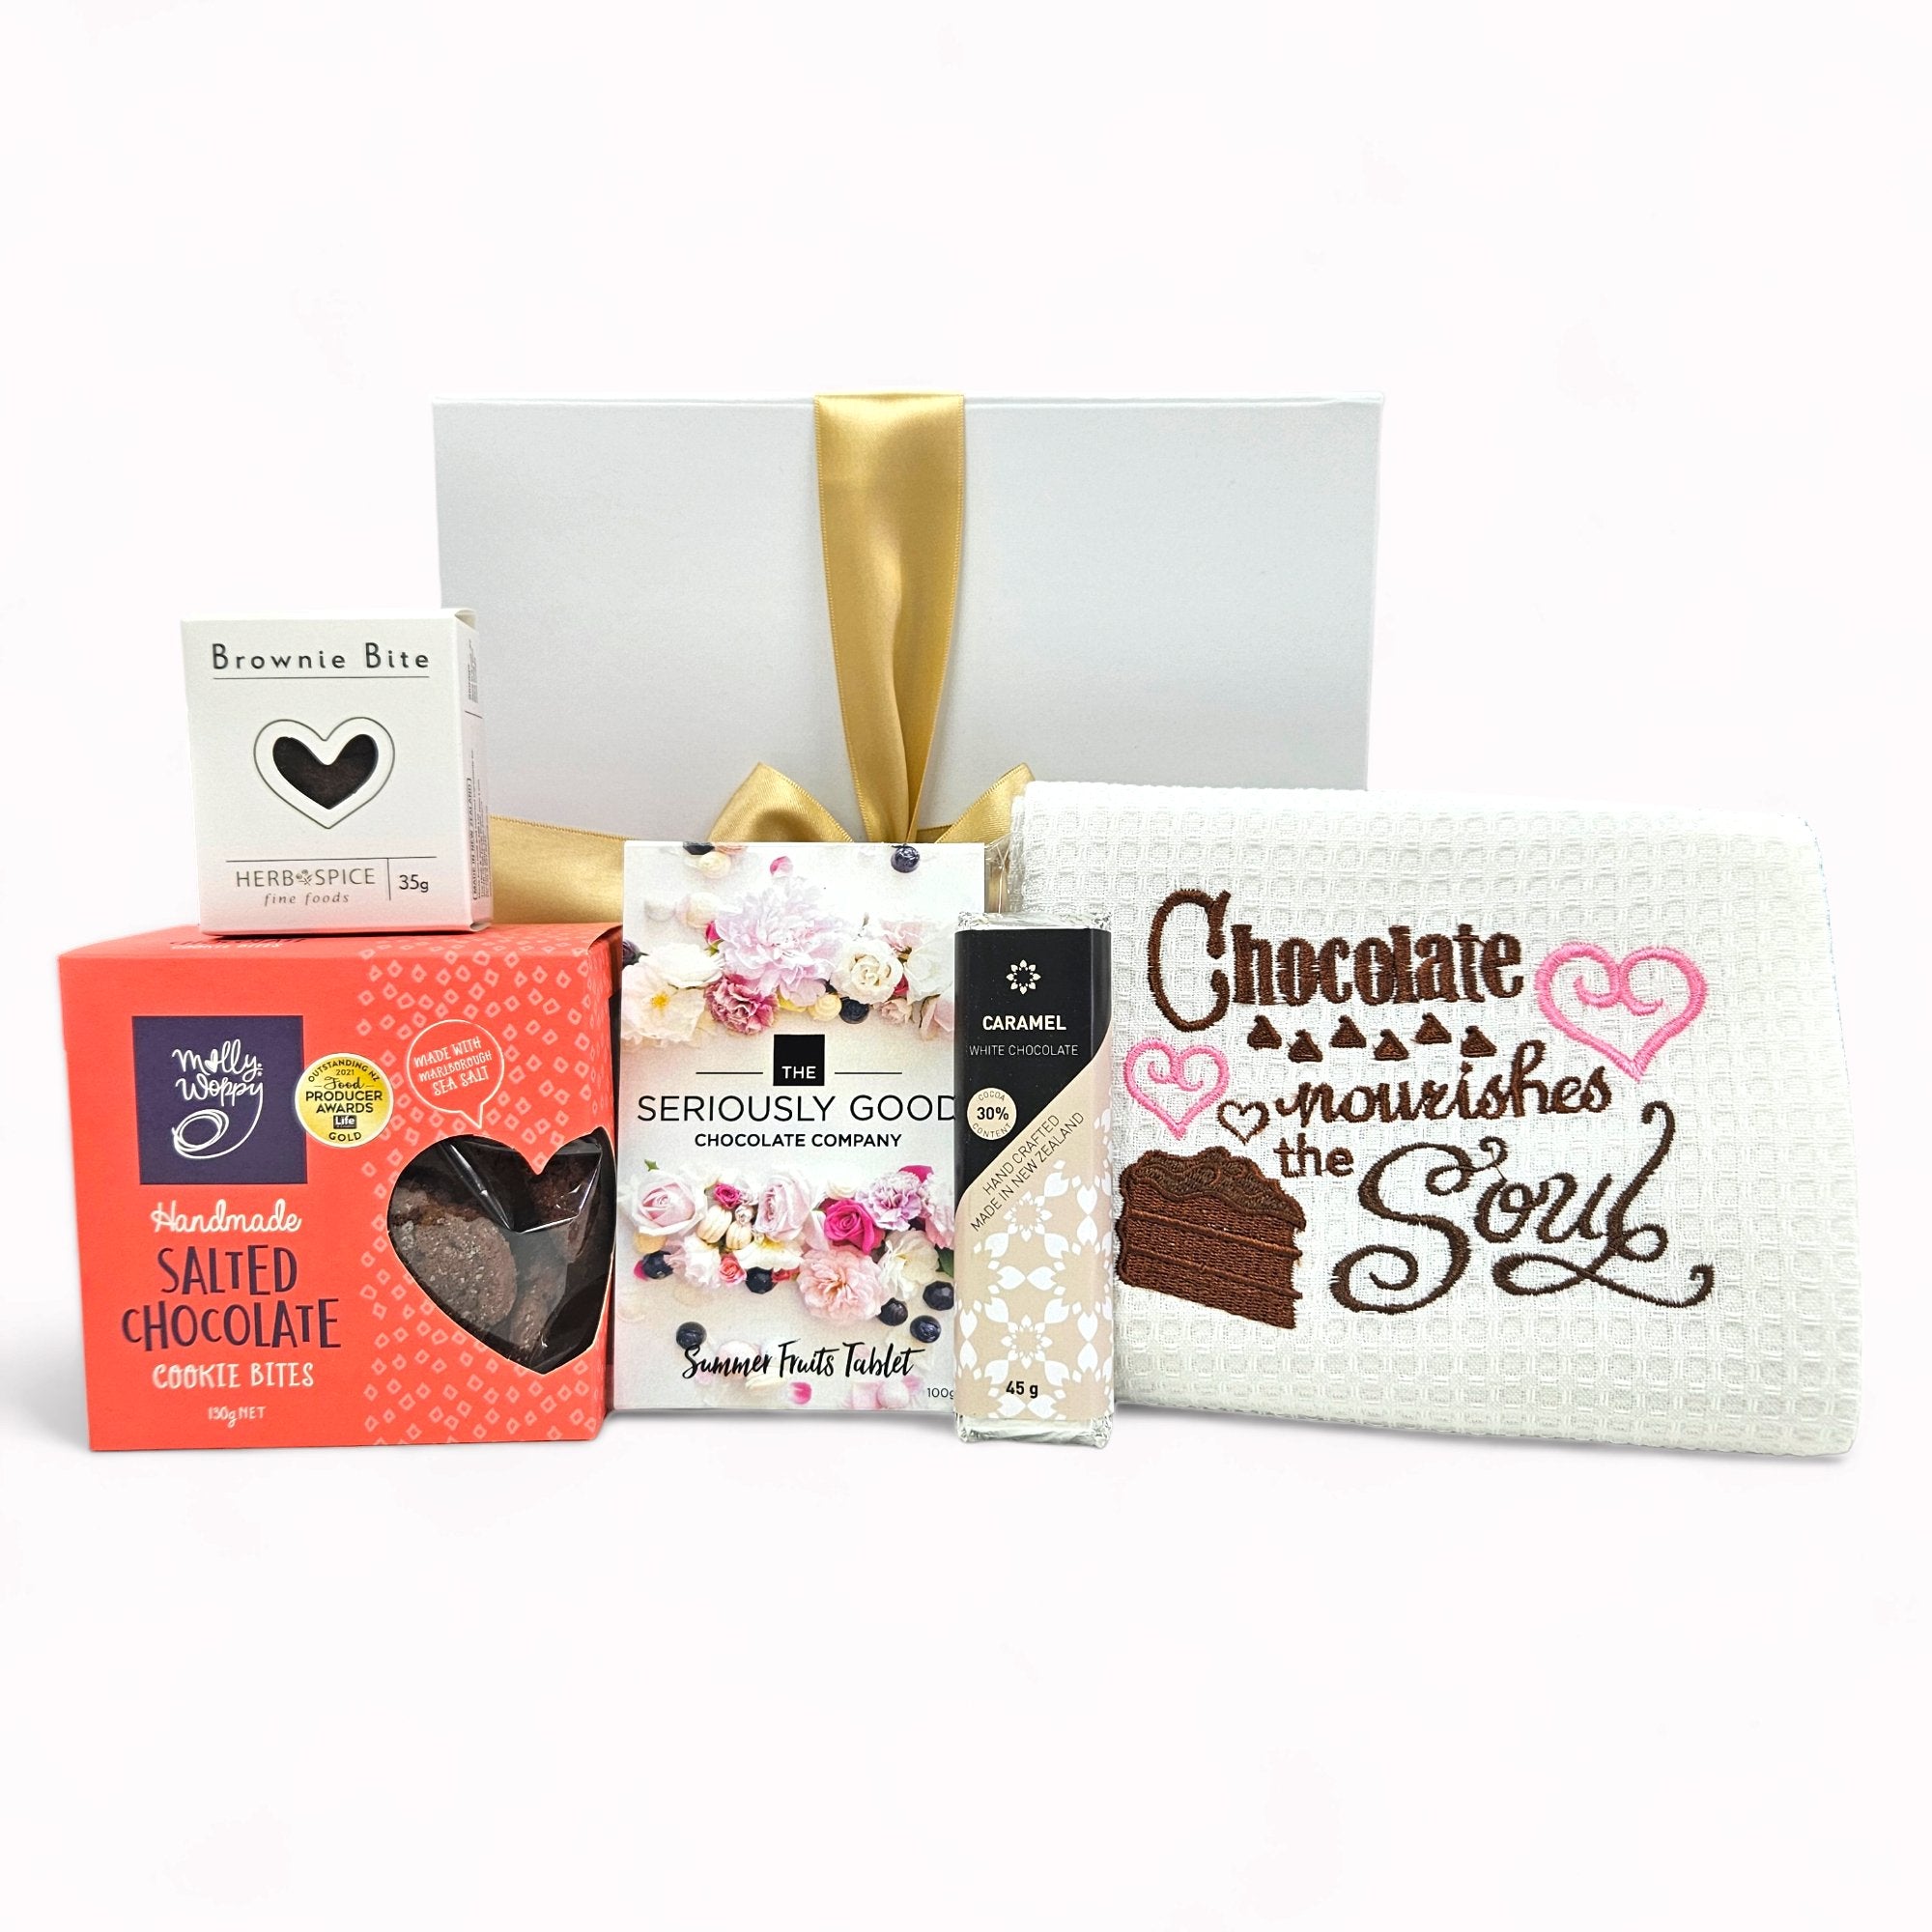 Chocolate nourishes the soul - Beautiful Gifts